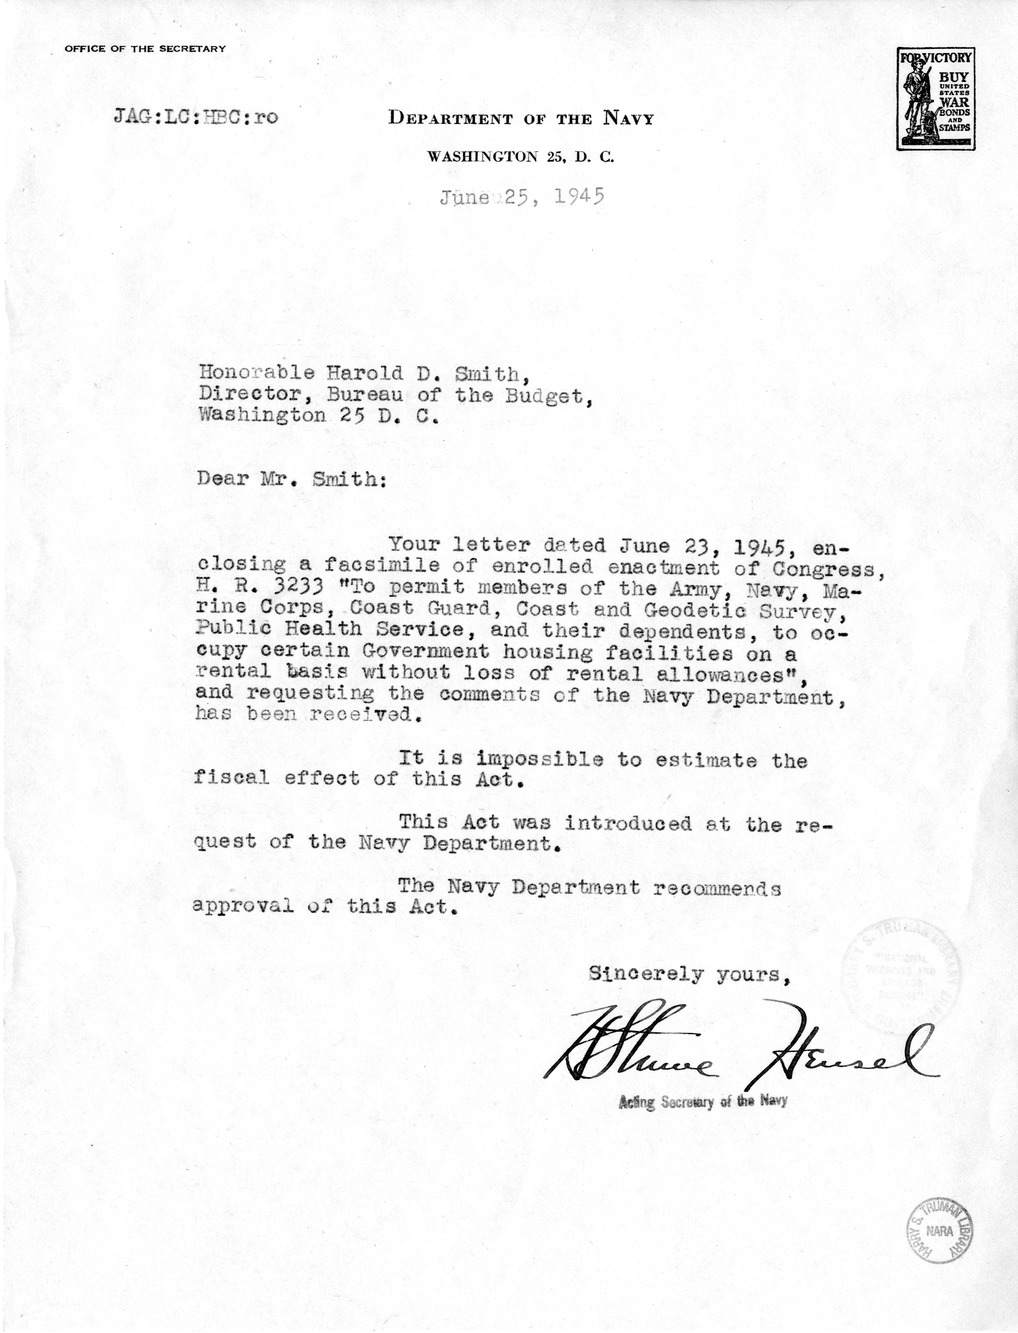 Memorandum from Harold D. Smith to M. C. Latta, H.R. 3233, To Permit Members of the Army, Navy, Marine Corps, Coast Guard, Coast and Geodetic Survey, Public Health Service, and Their Dependents, to Occupy Certain Government Housing Facilities on a Rental 